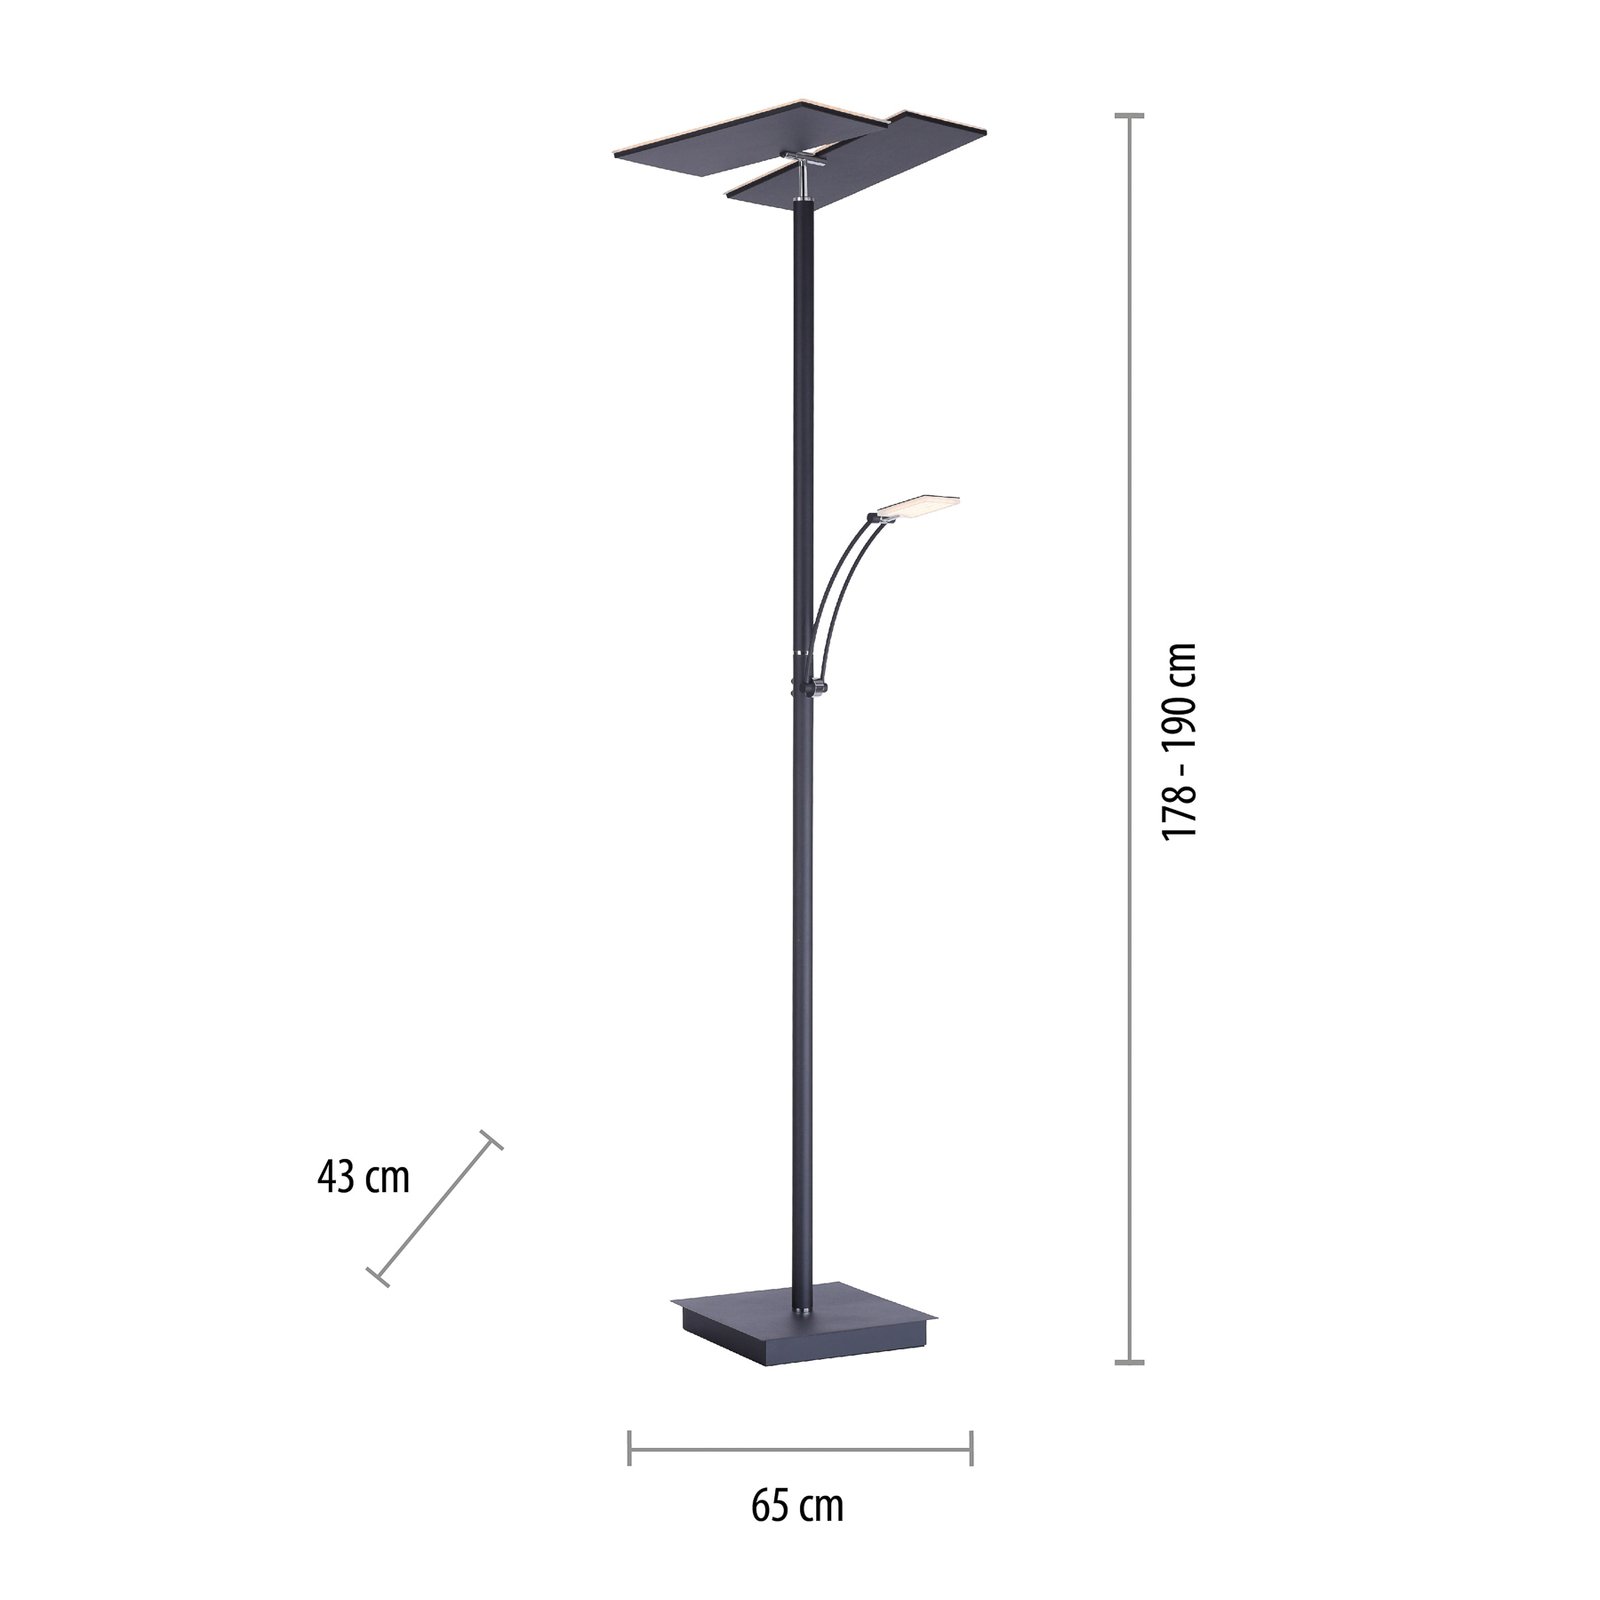 Lampadaire LED Artur, anthracite, dimmable, CCT